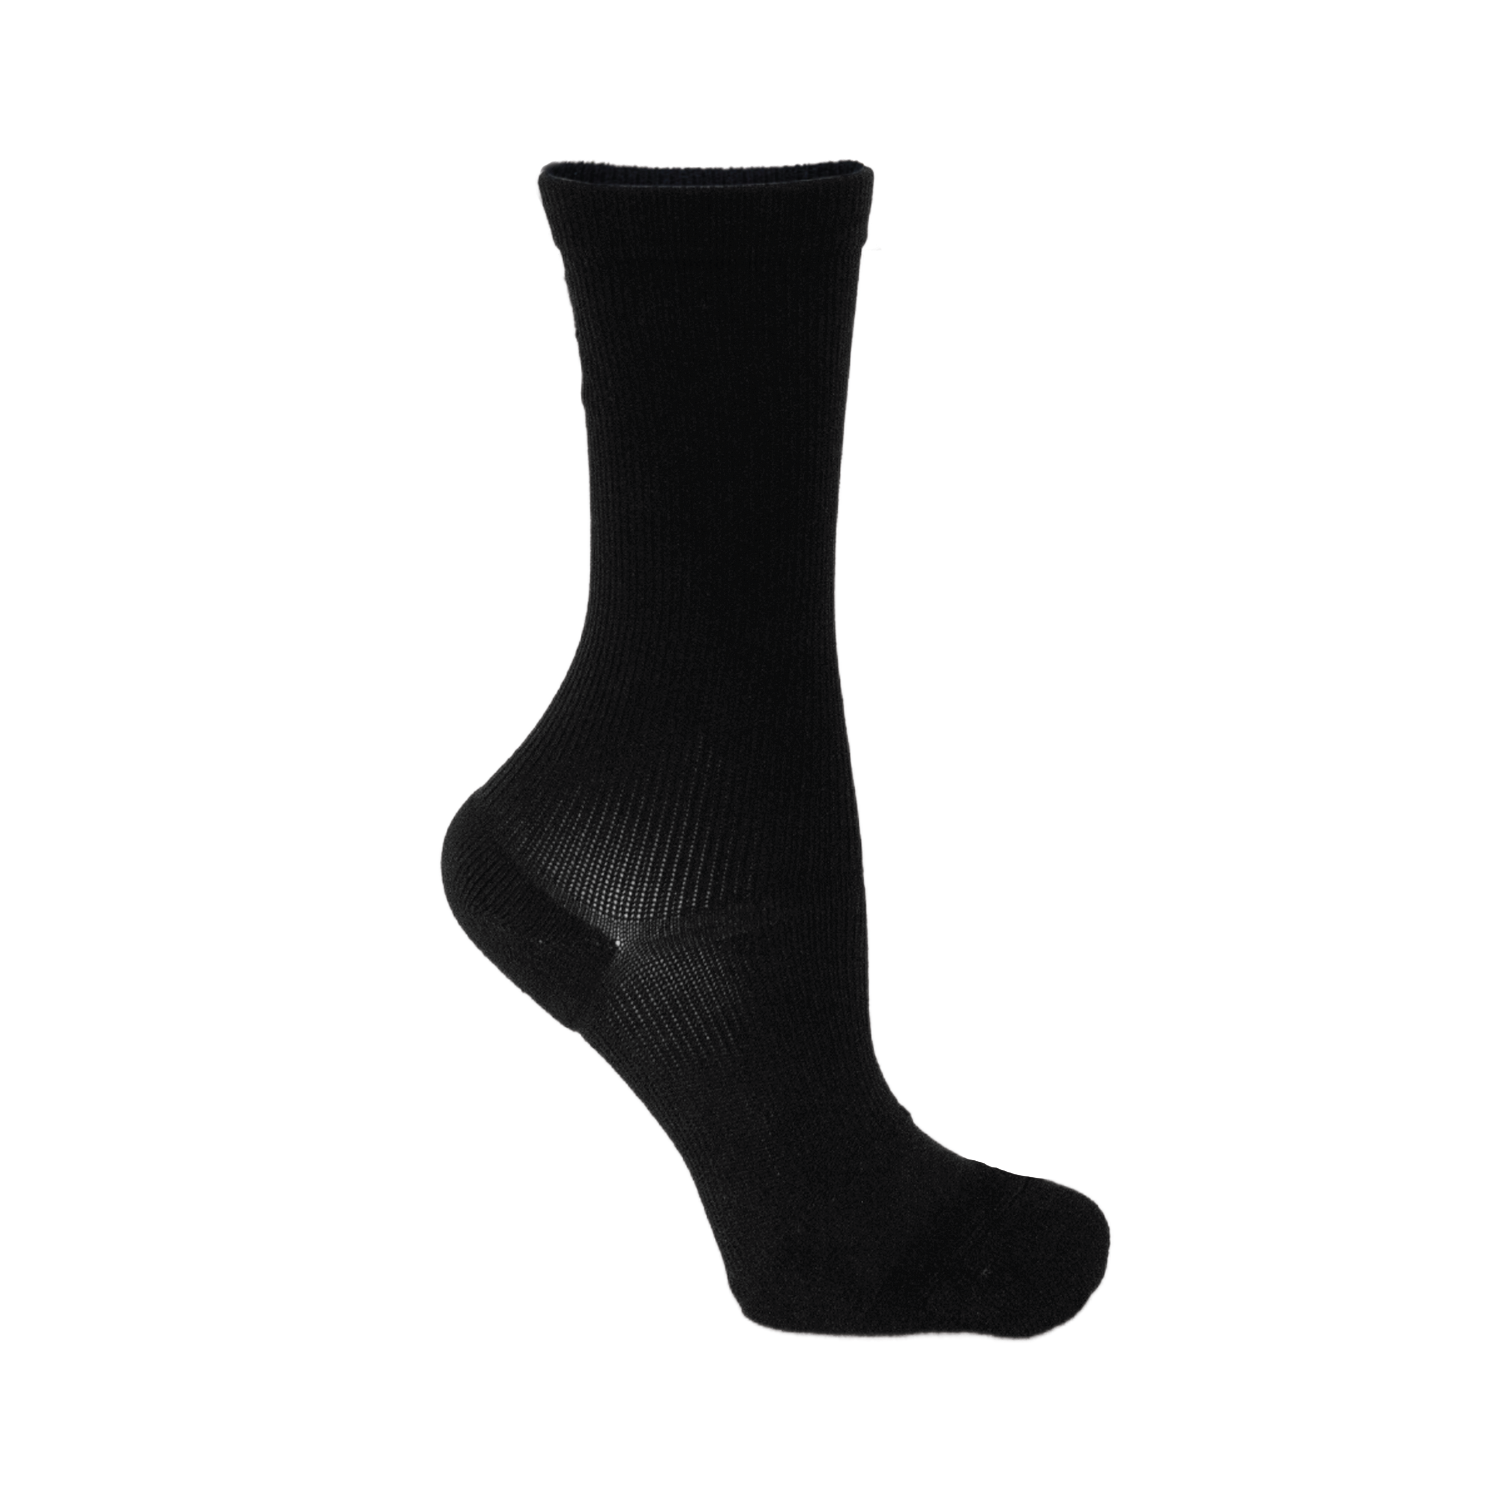 Apolla - Socks - Mid Calf Recovery - THE INIFINITE SHOCK with traction